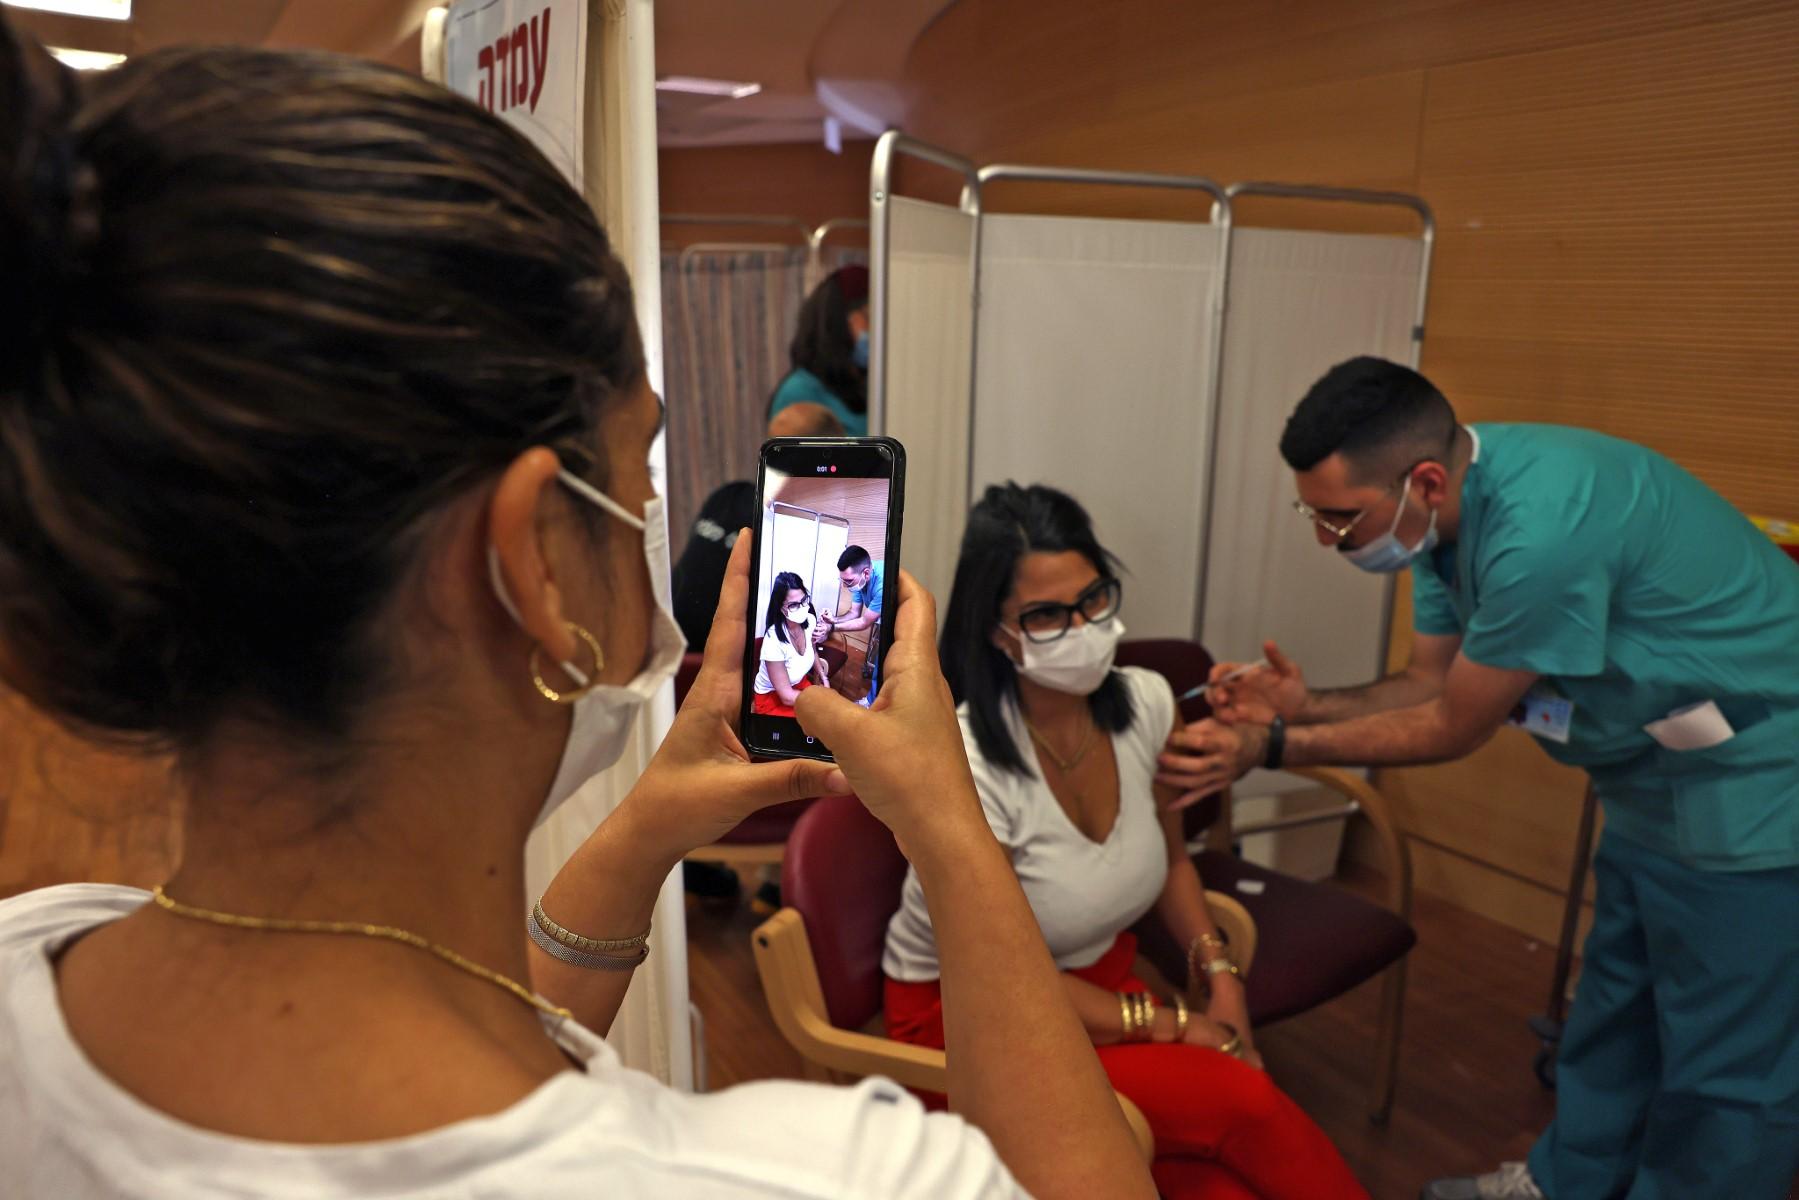 Israeli medics administer a third booster jab of the Covid vaccine to members of medical teams, at the Hadassah Ein Kerem Hospital in Jerusalem, on Aug 15, 2021. Photo: AFP